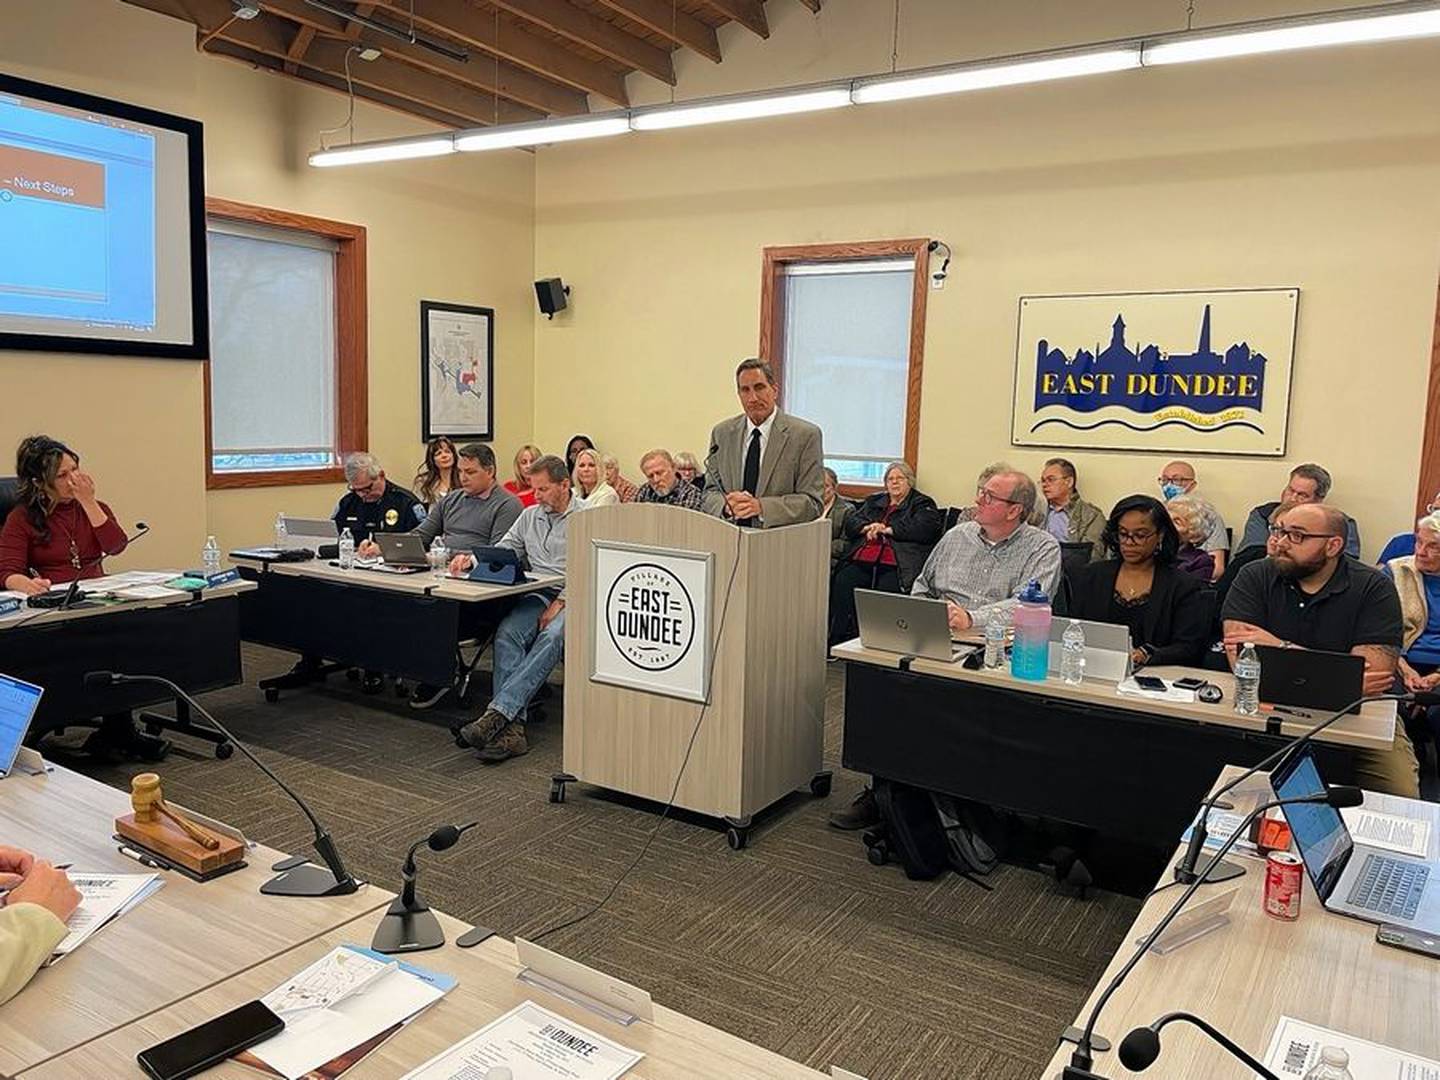 Dan Shapiro, an attorney for owners of the Elgin Mall, criticized "veiled comments" at the East Dundee board meeting on Monday, March 20, 2023, for being offensive to Hispanics.